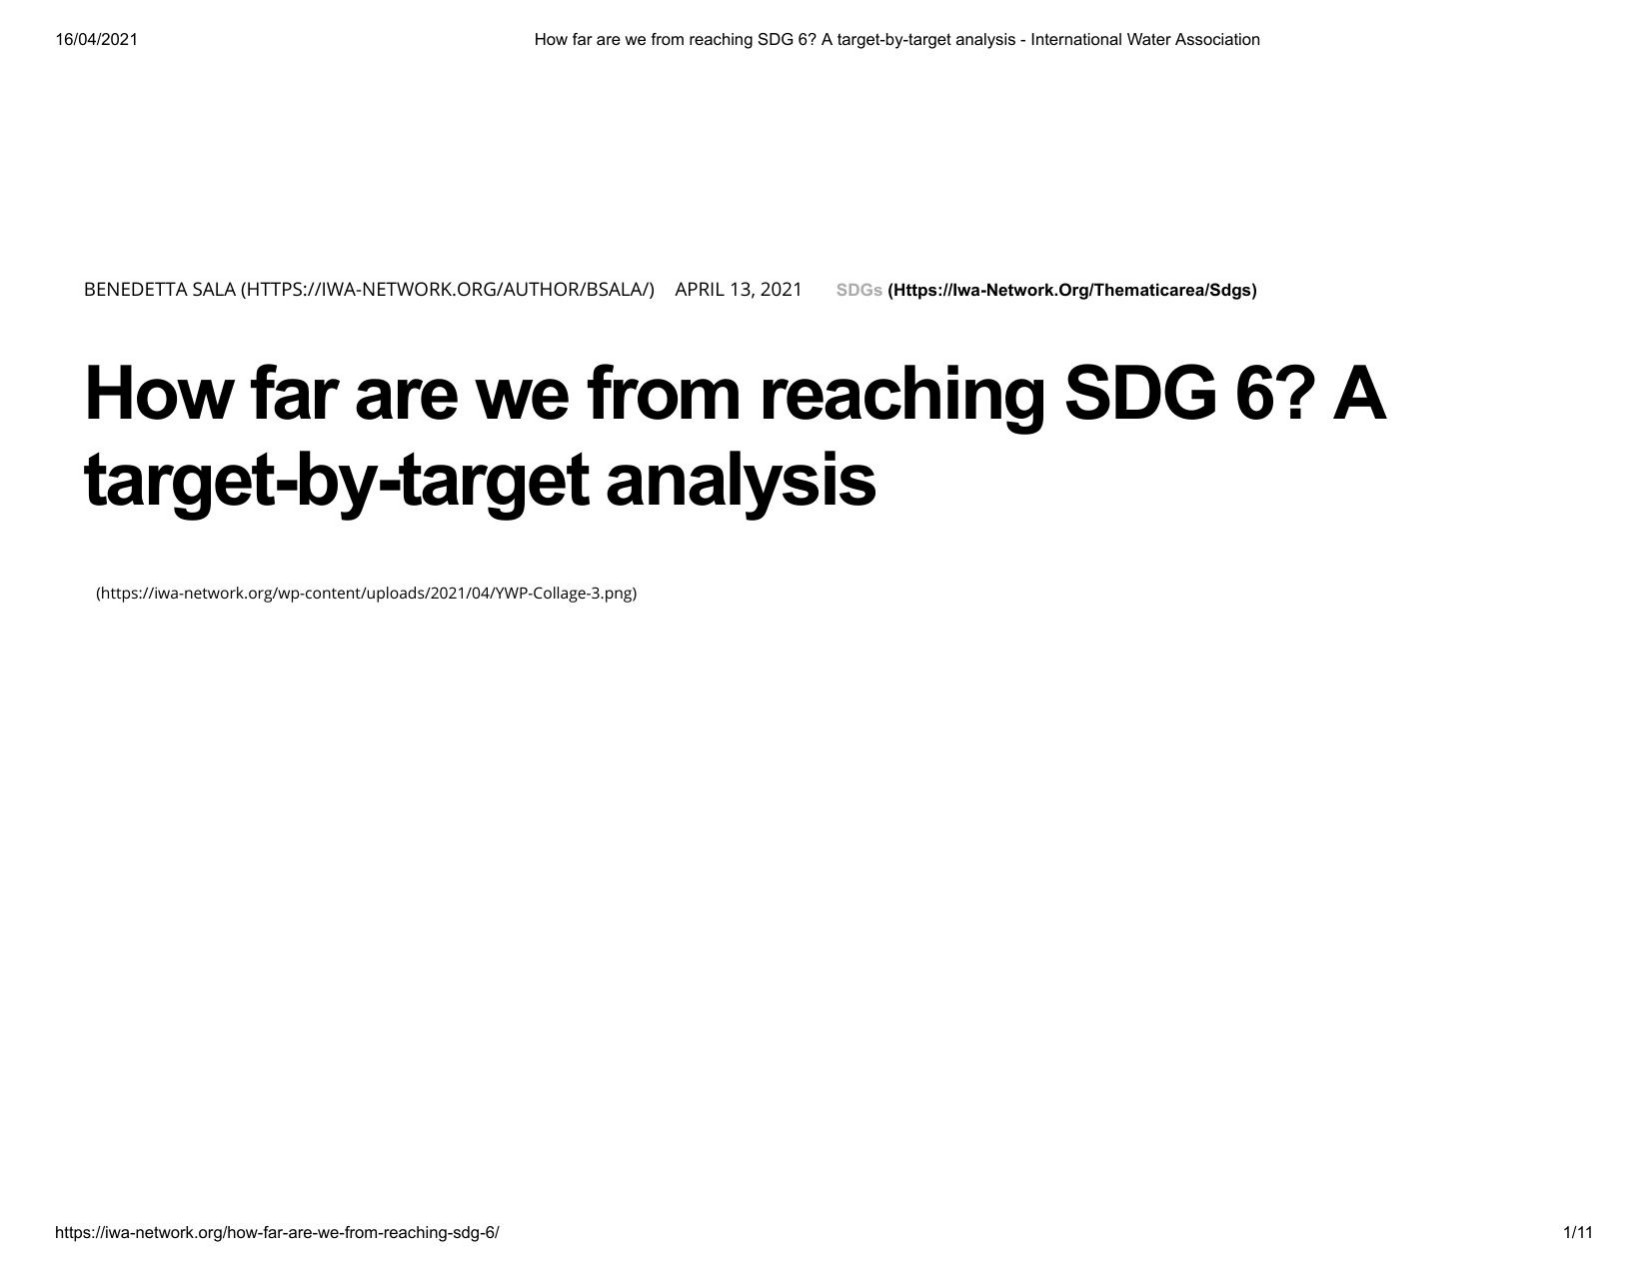 How far are we from reaching SDG 6  A target-by-target analysis